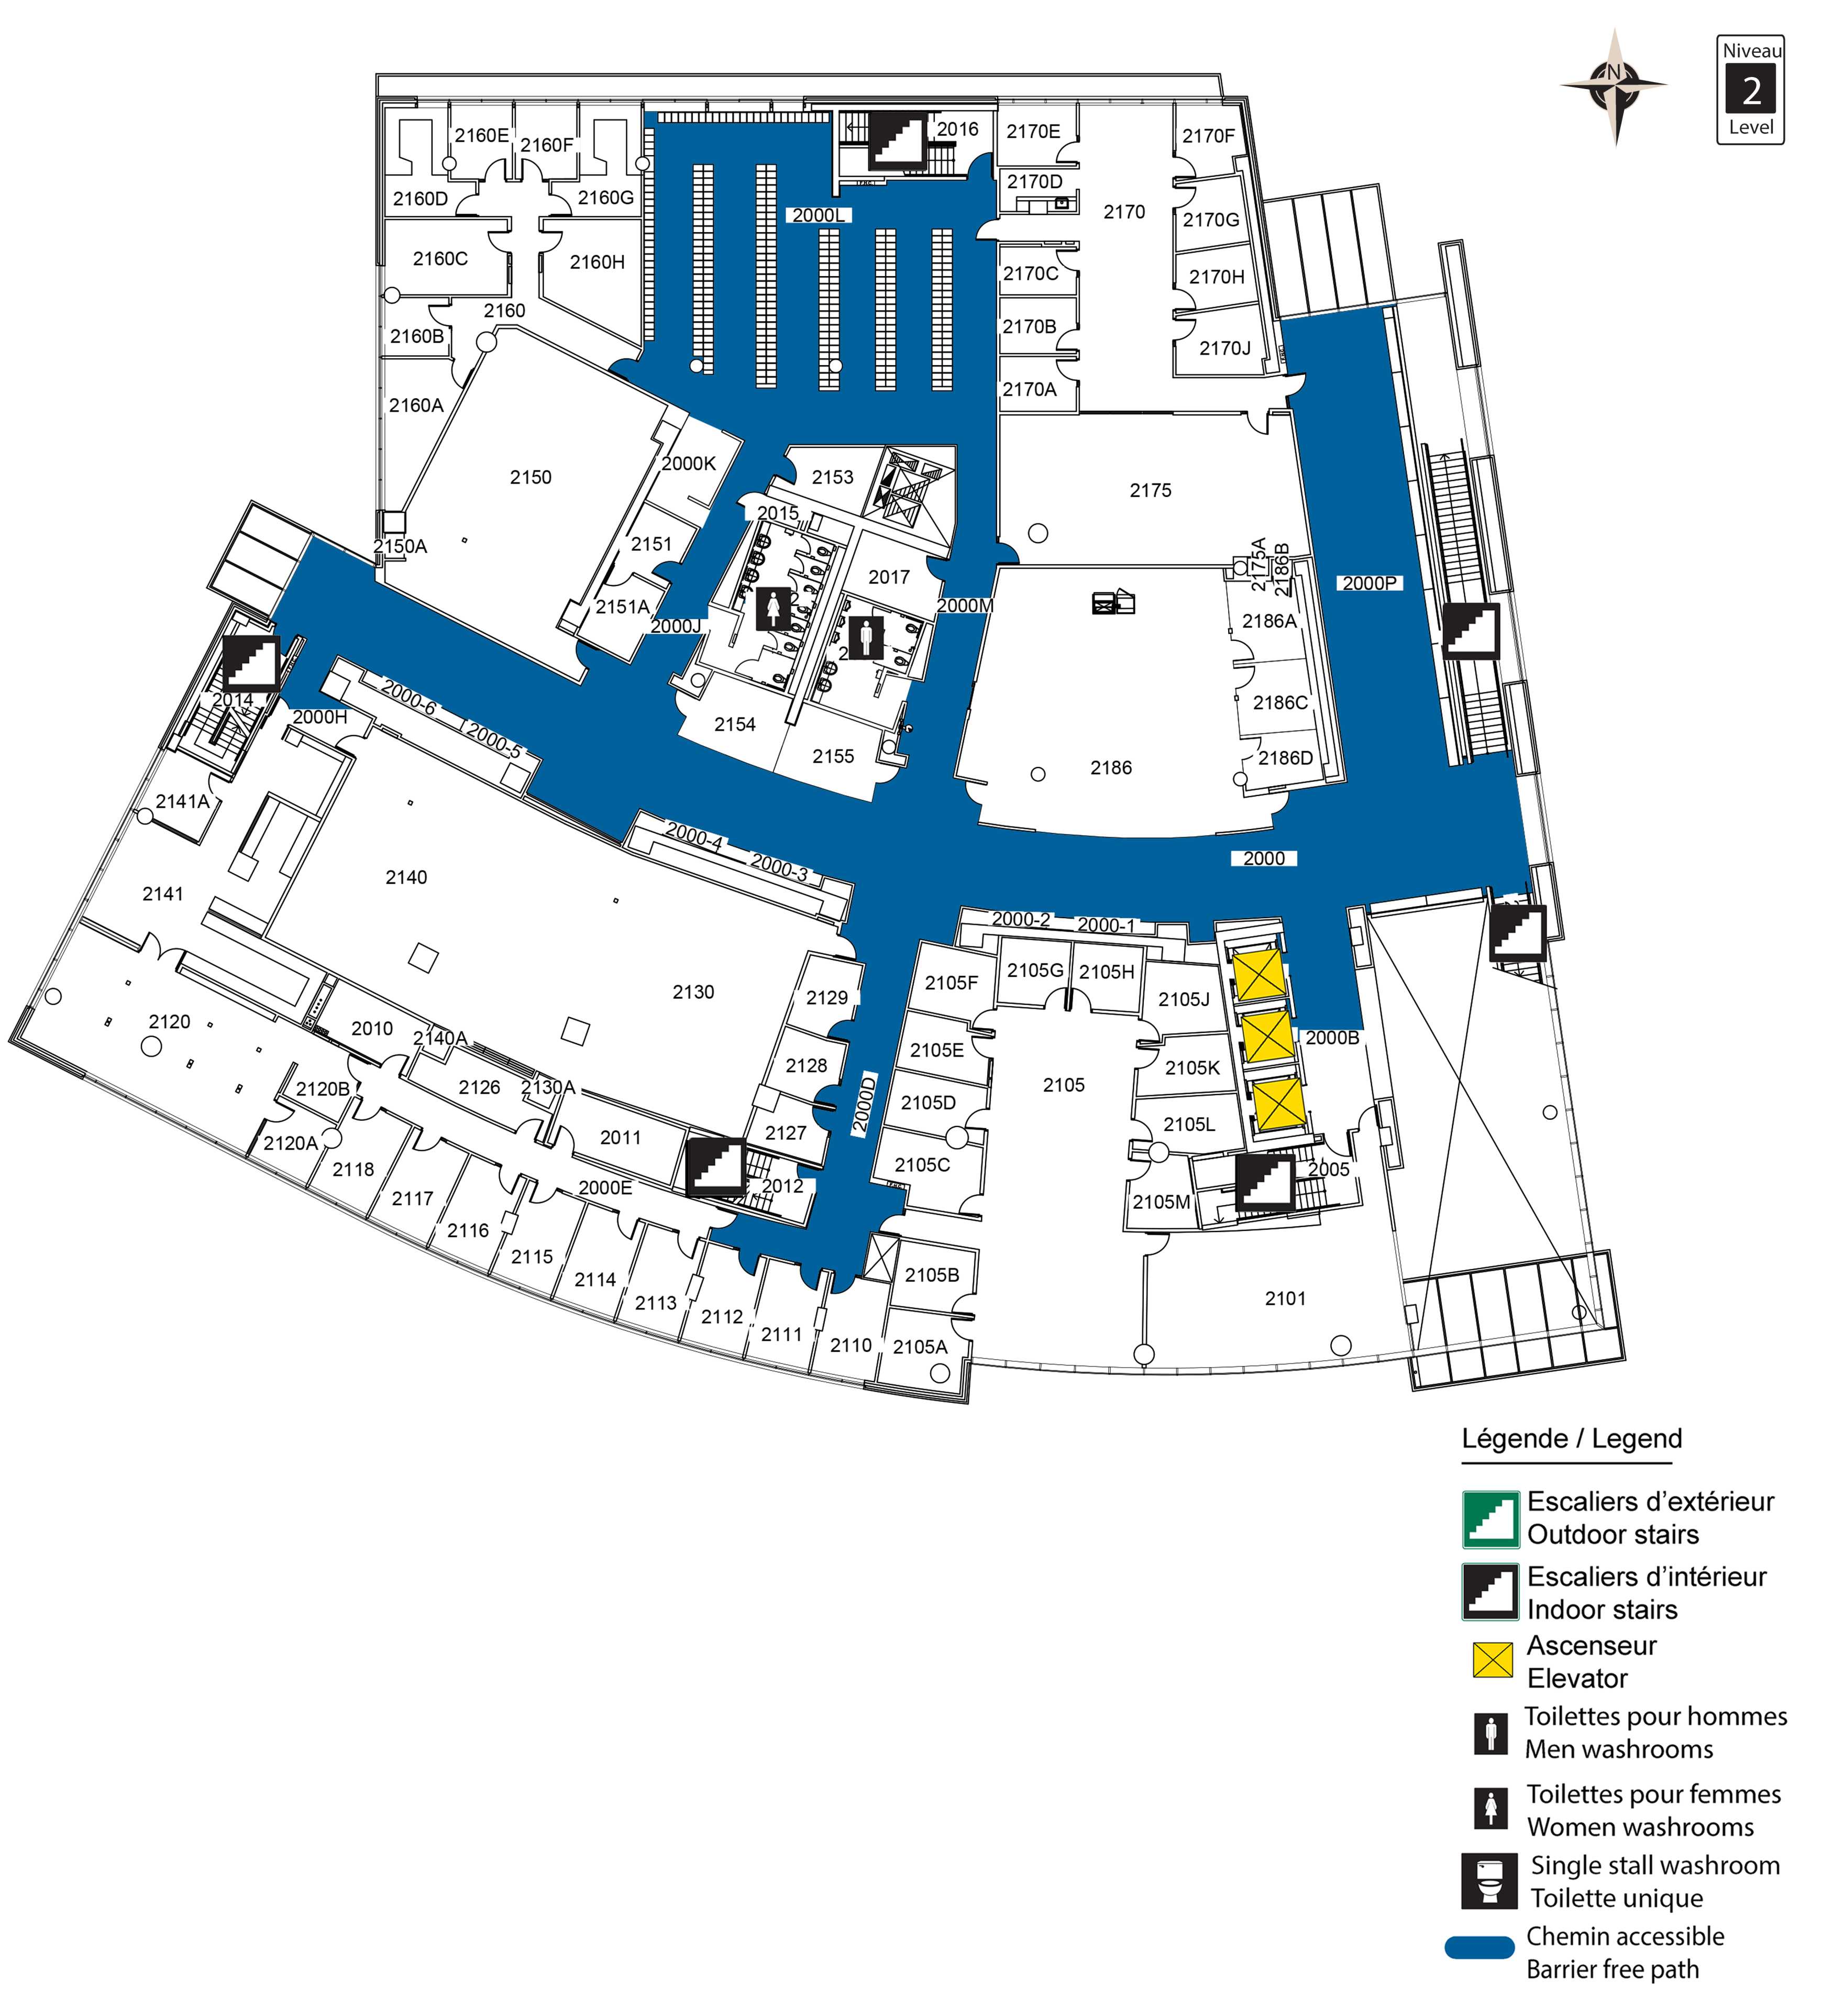 Accessible map - DMS level 2